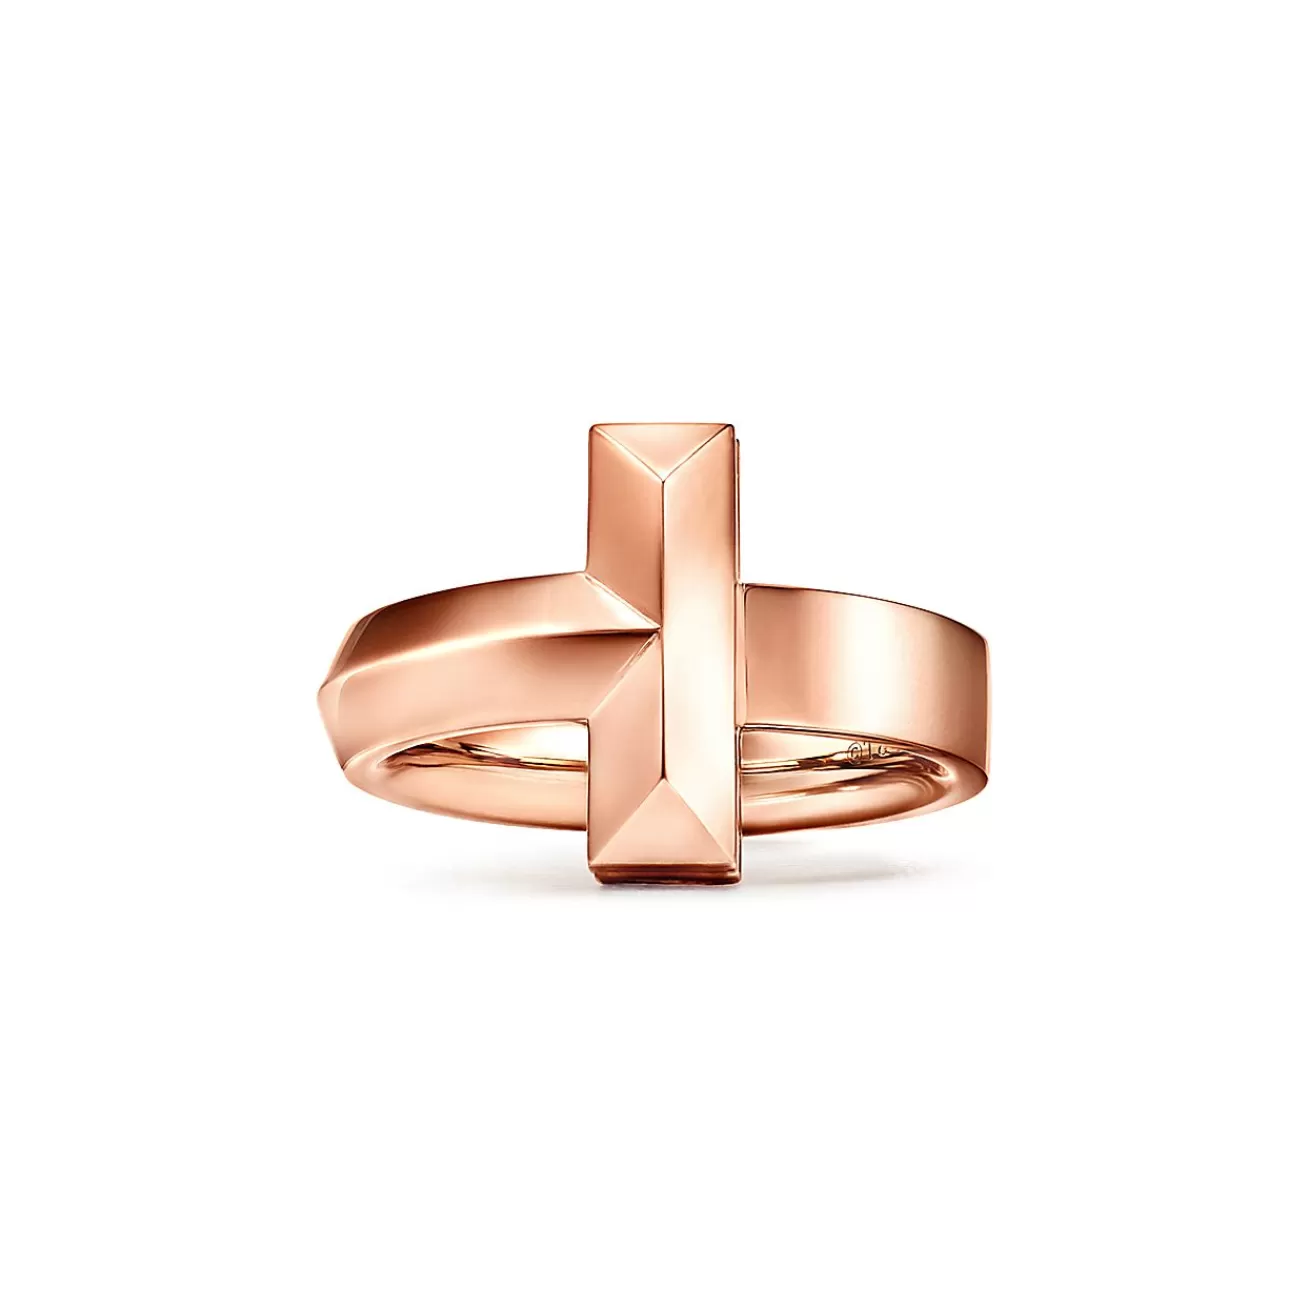 Tiffany & Co. Tiffany T T1 Ring in Rose Gold, 4.5 mm | ^ Rings | Men's Jewelry